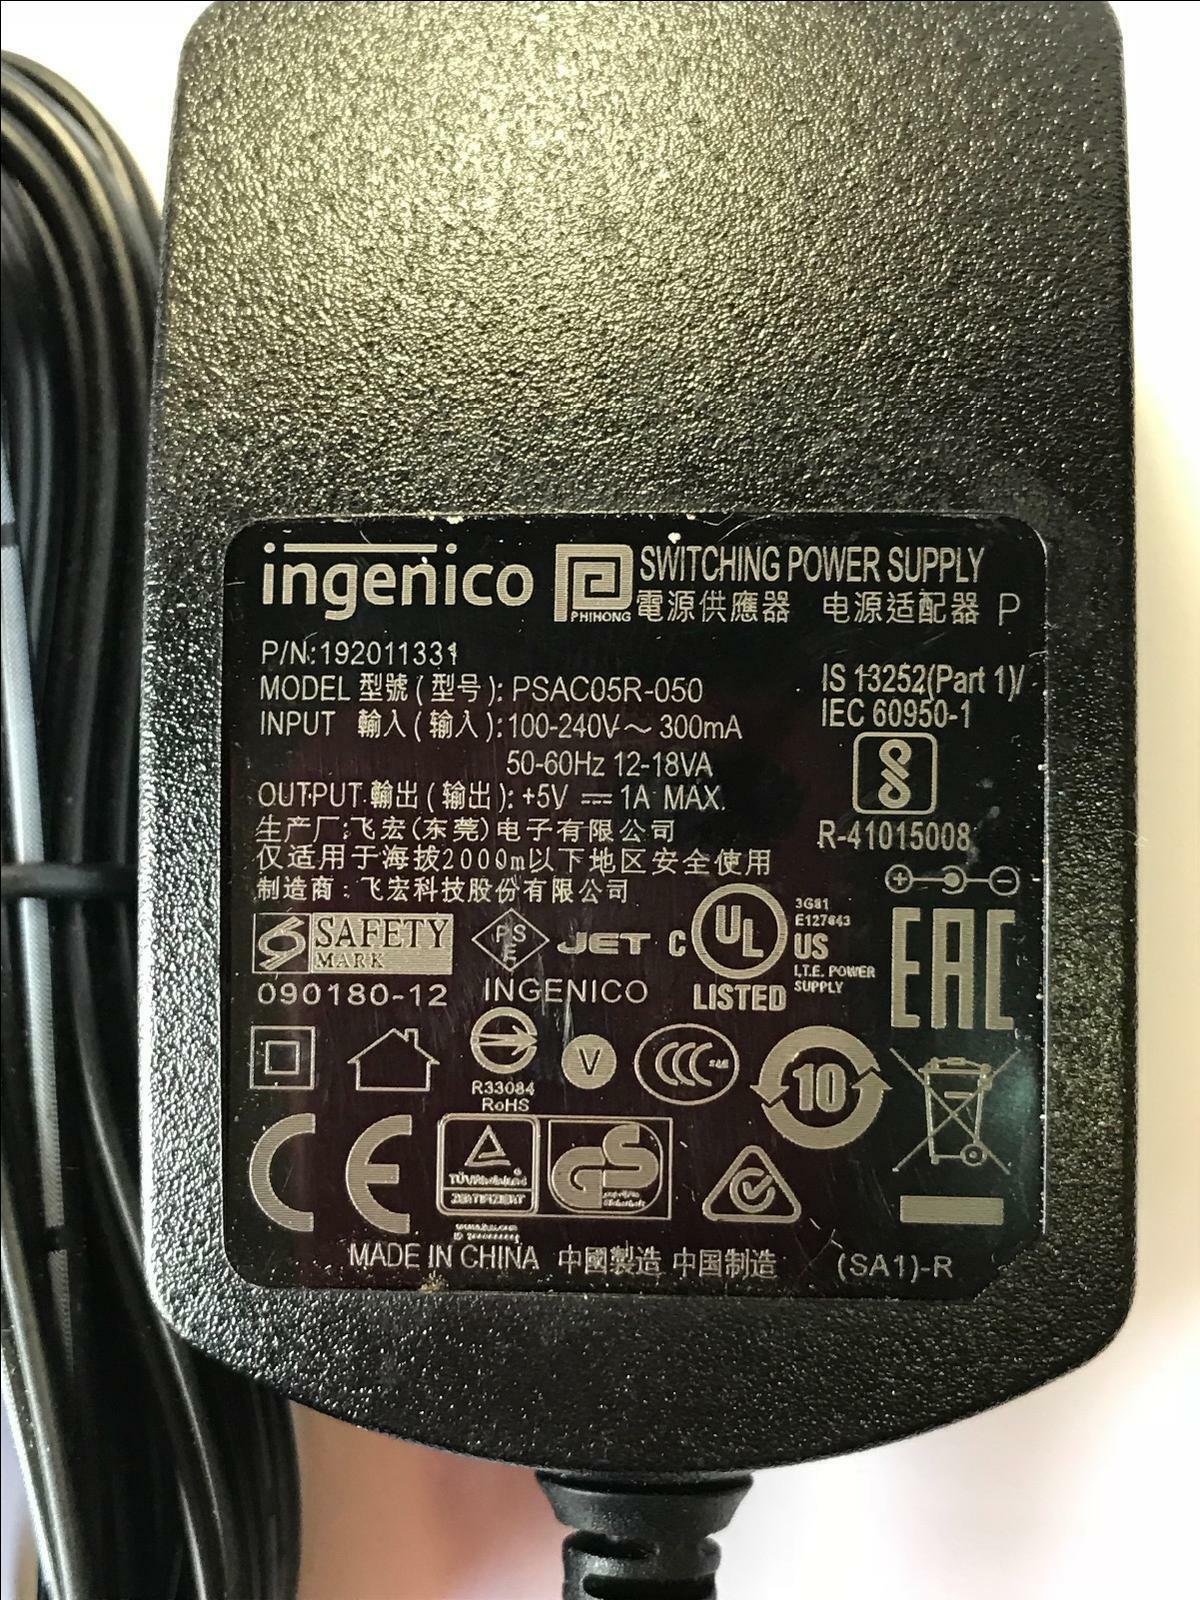 New 5V 1A Ingenico 192011352 PSAC05R-050 Switching Power Supply ac adapter